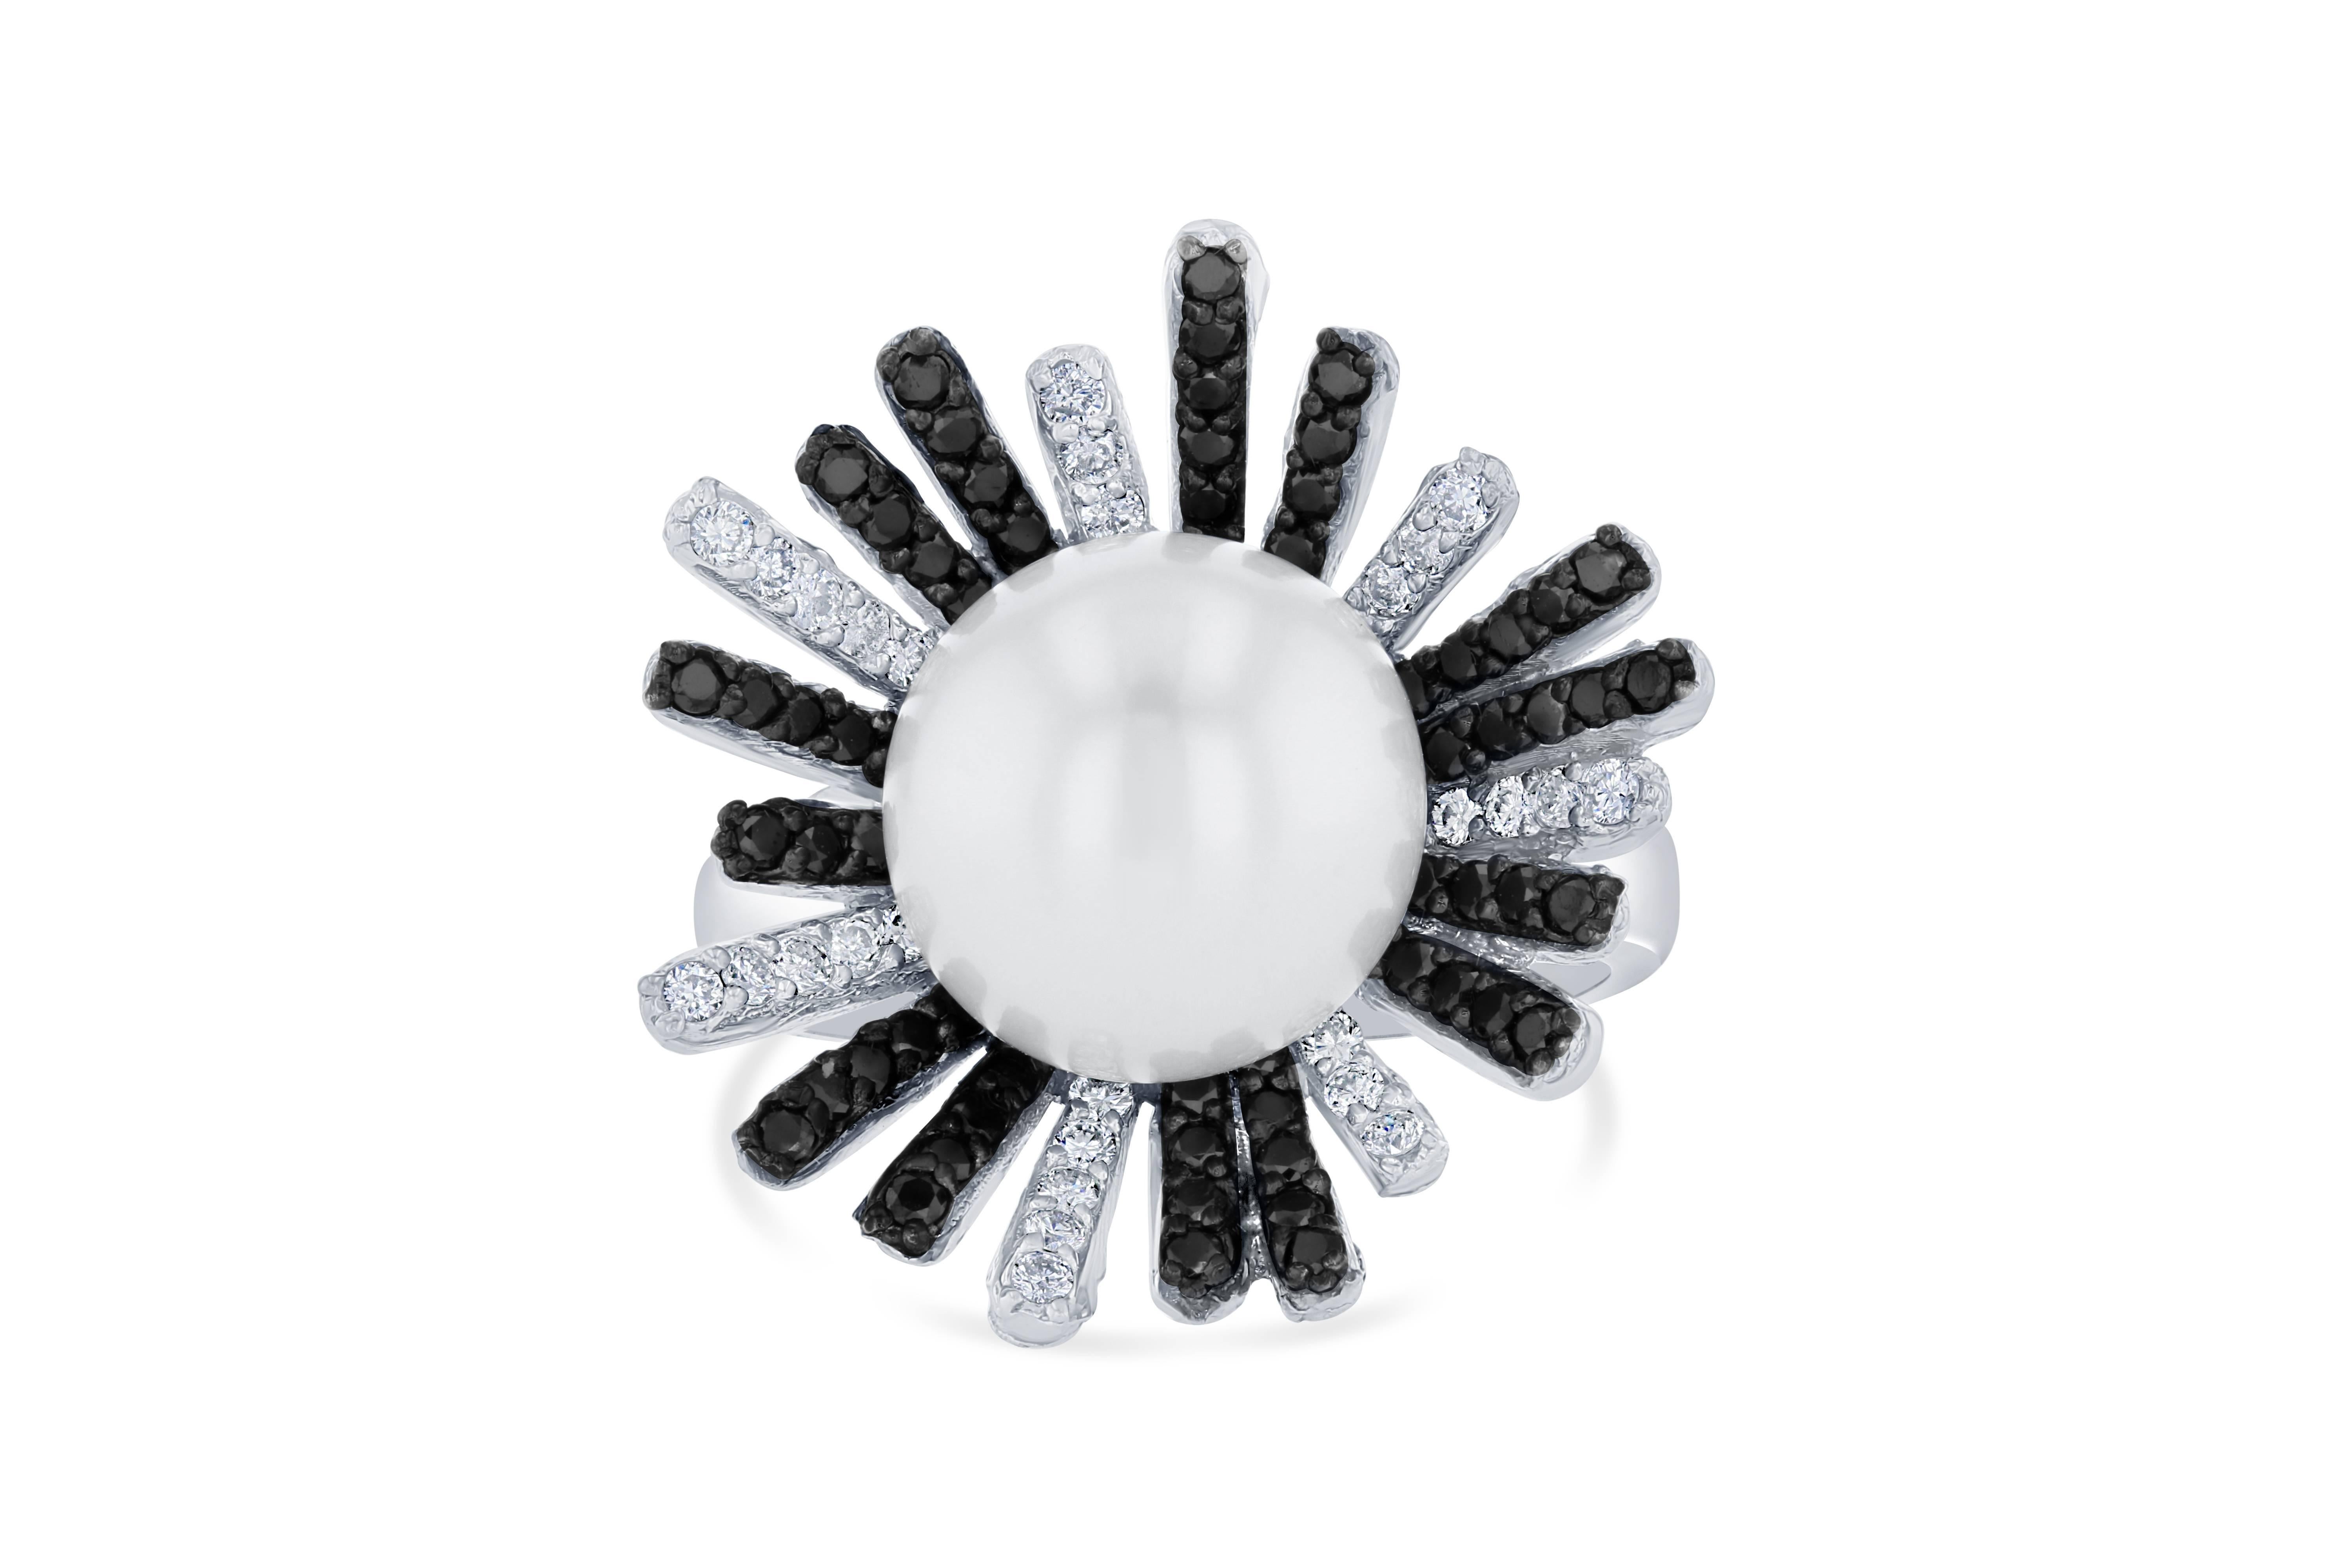 Gorgeous Black Diamond ring that is sure to elevate your look! There is a beautiful South Sea Pearl in the center of the ring followed by petals of alternating black and white diamonds that are set surrounding the pearl. 

67 Black Round Cut